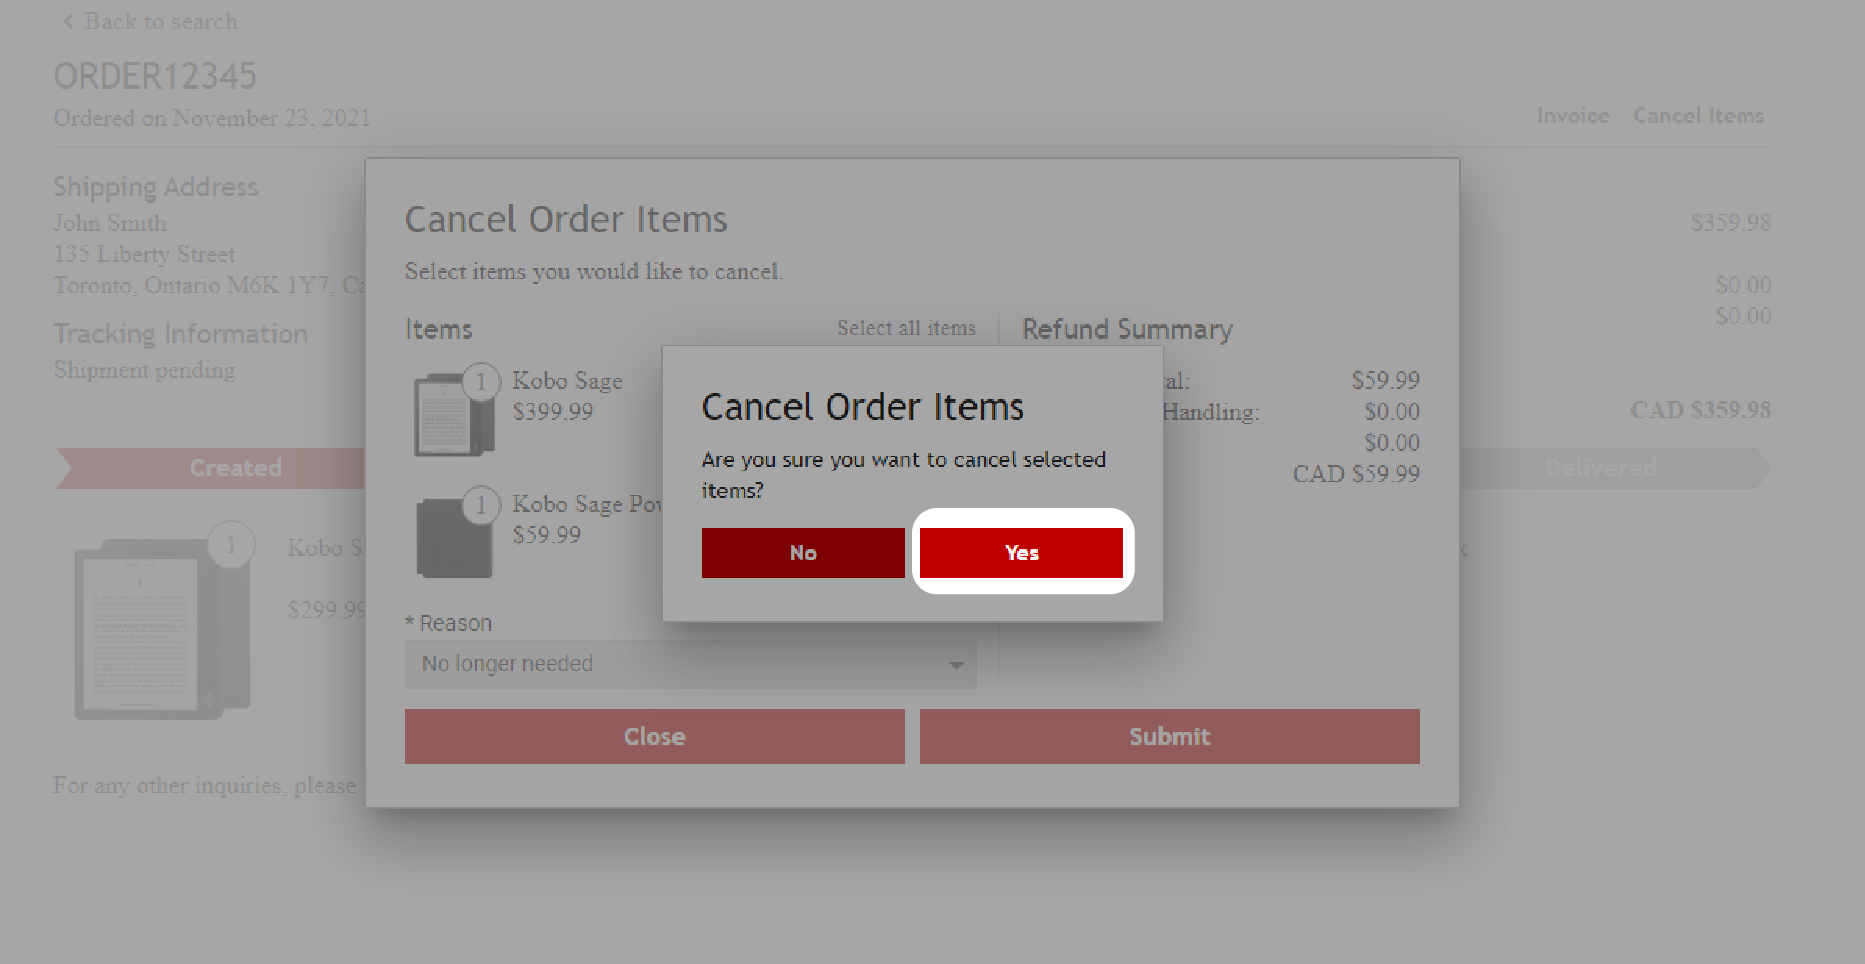 Cancel_orderd_items_-_Yes-01.png